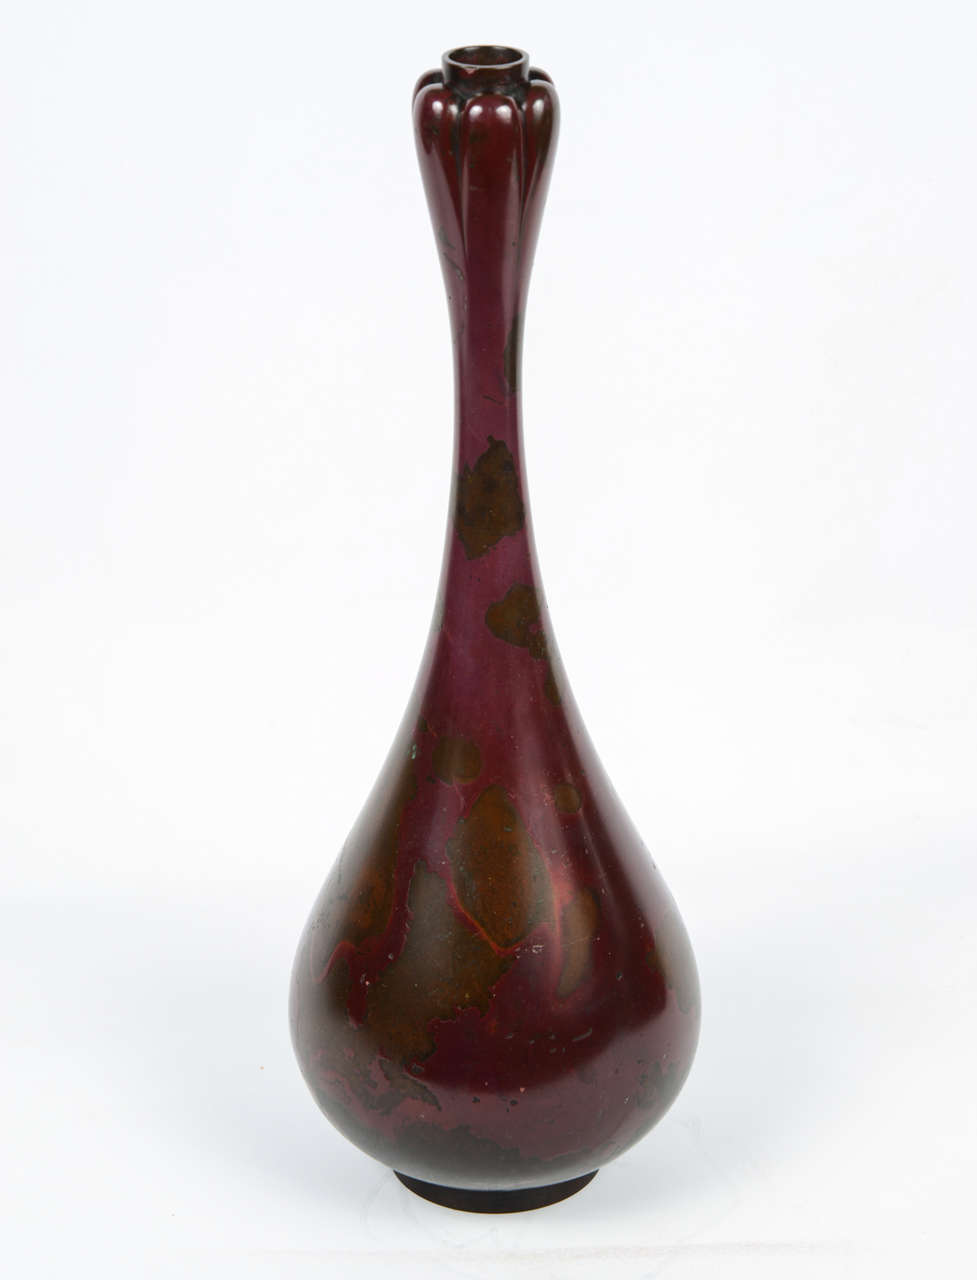 Bronze vase with red patina and long shaped neck known as 'garlic clove.'